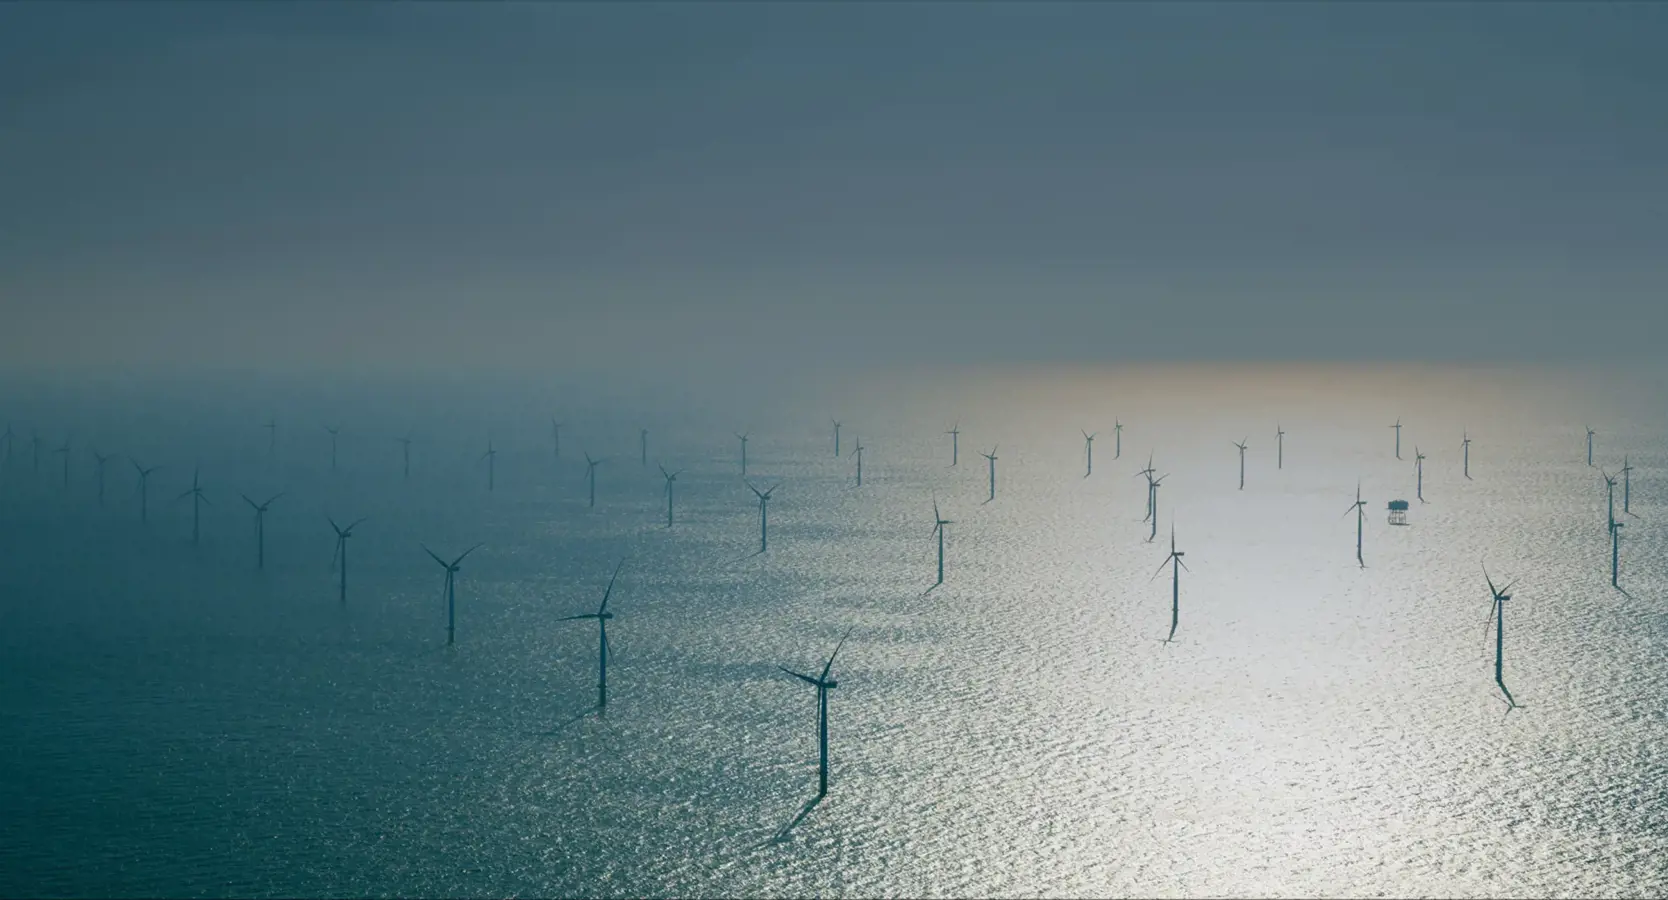 An image of Vineyard Wind 1. The image displays multiple windmills situated in the ocean.